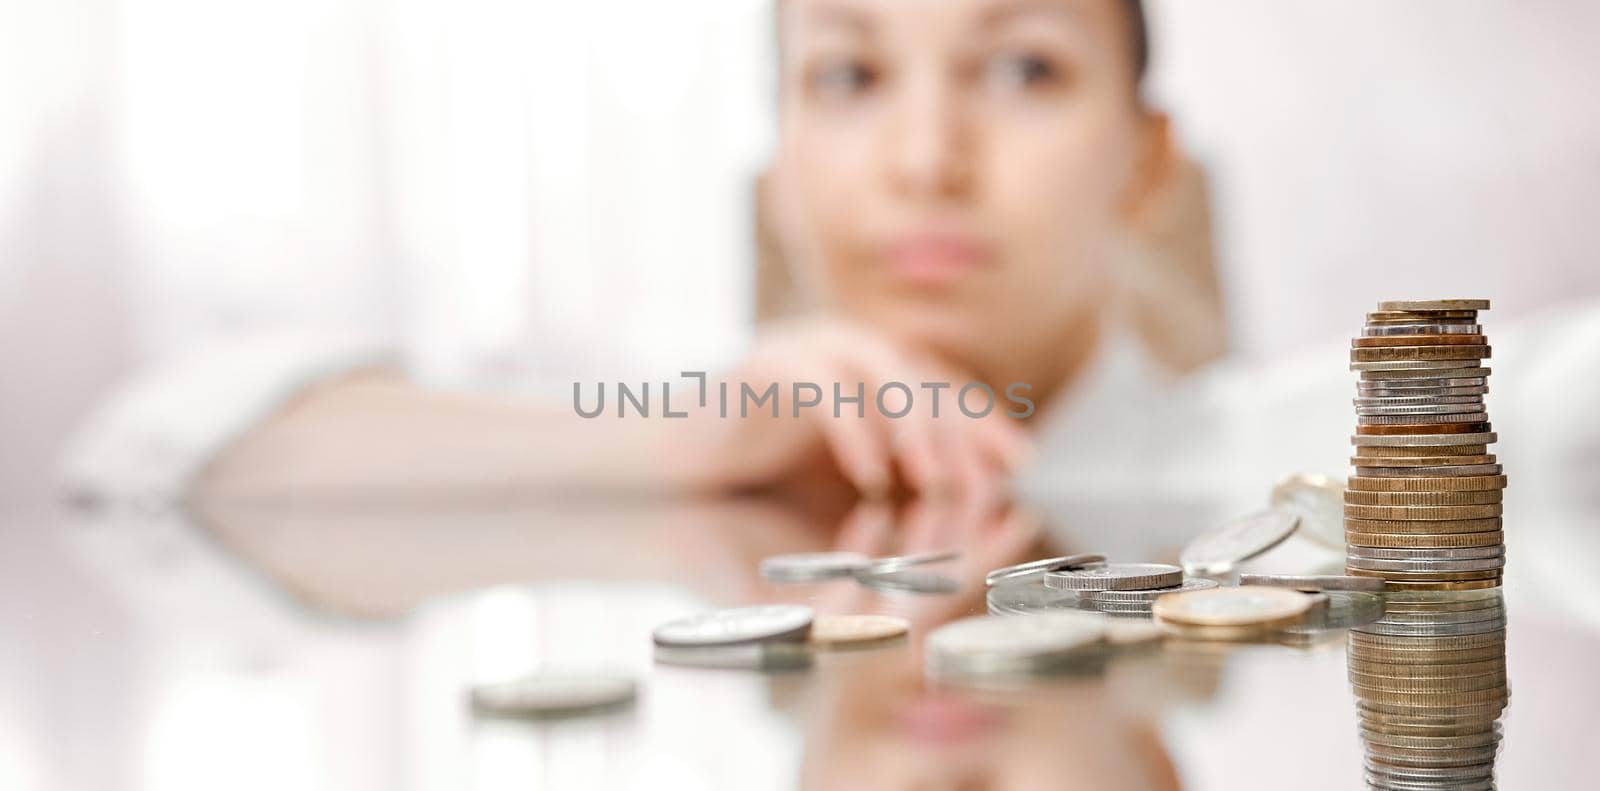 A woman looks thoughtfully at a fallen stack of coins on a mirrored table by AntonIlchanka